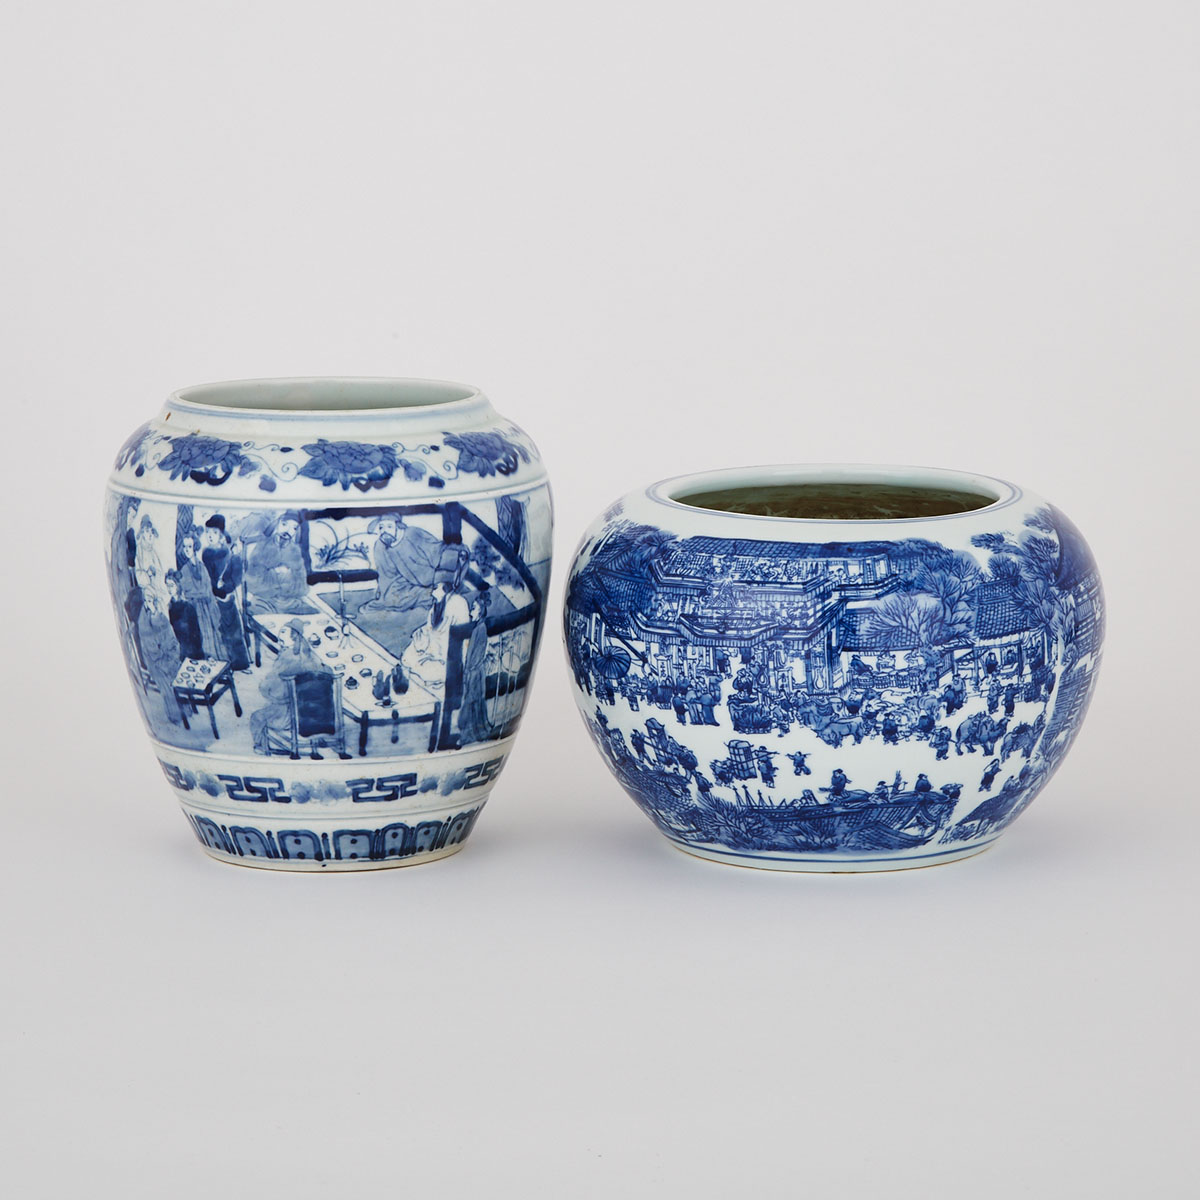 Two Blue and White Porcelain Vessels, 20th Century